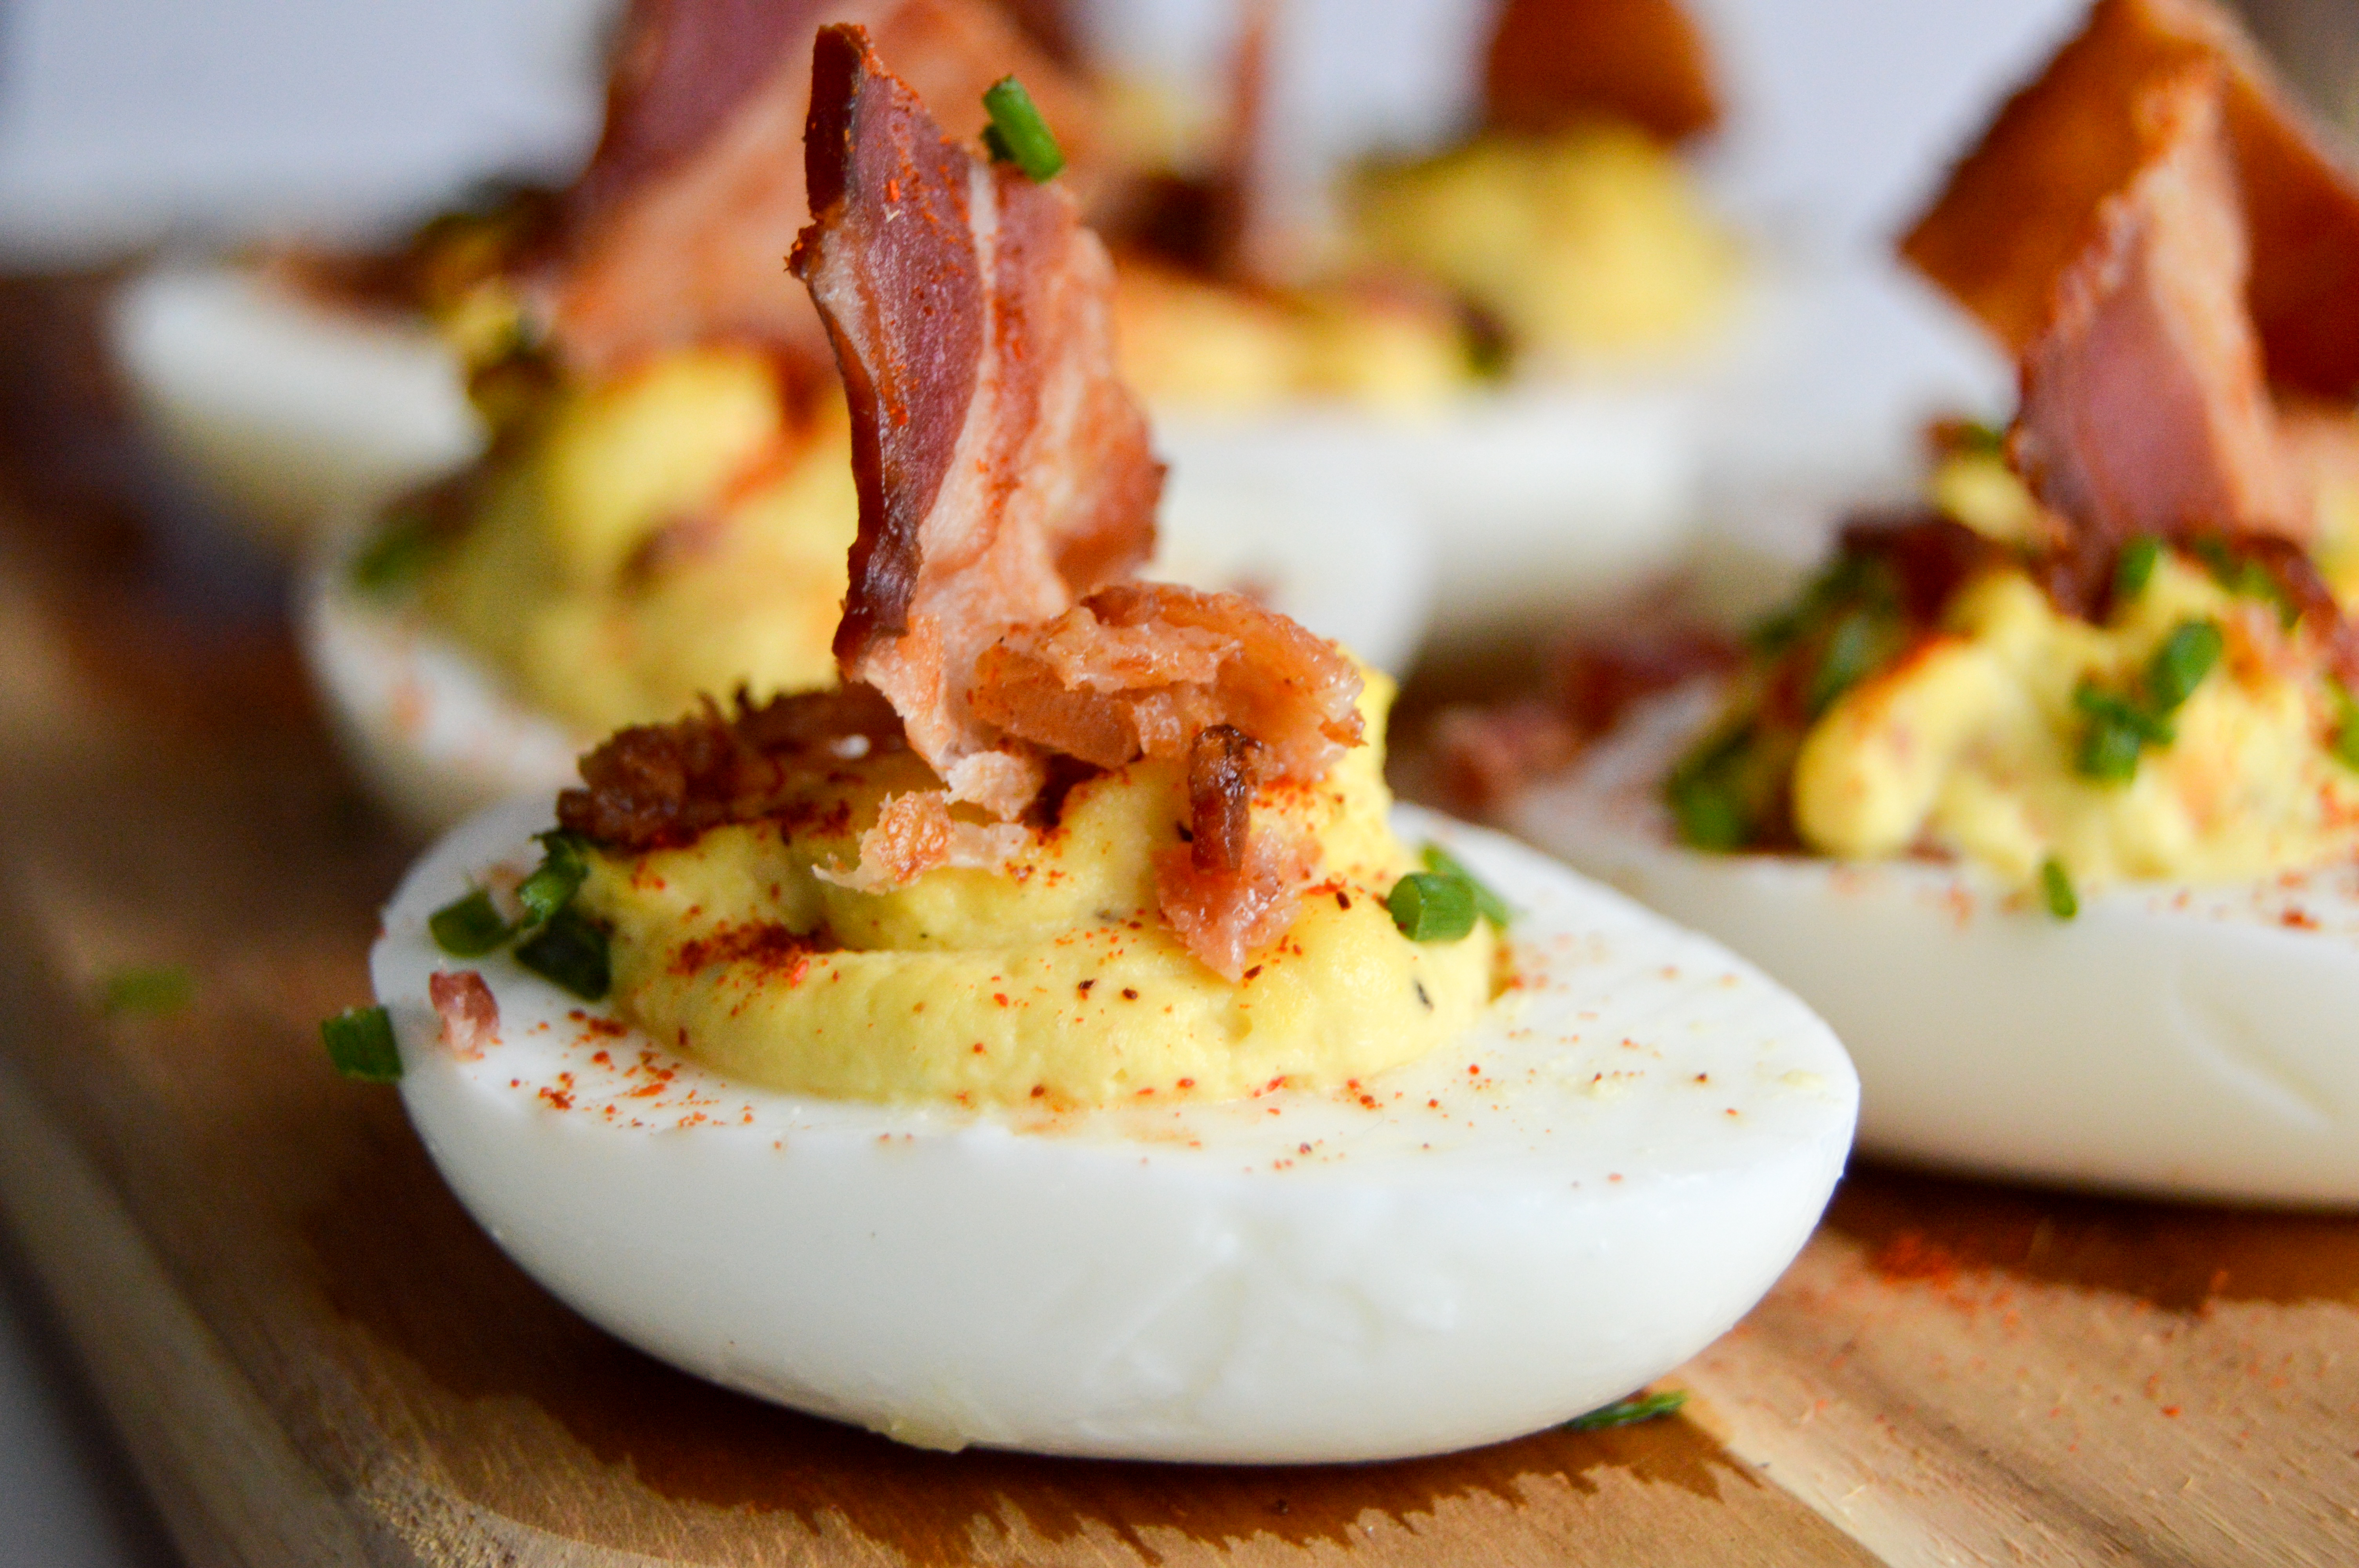 Recipe and Directions for Bacon Loaded Deviled Eggs